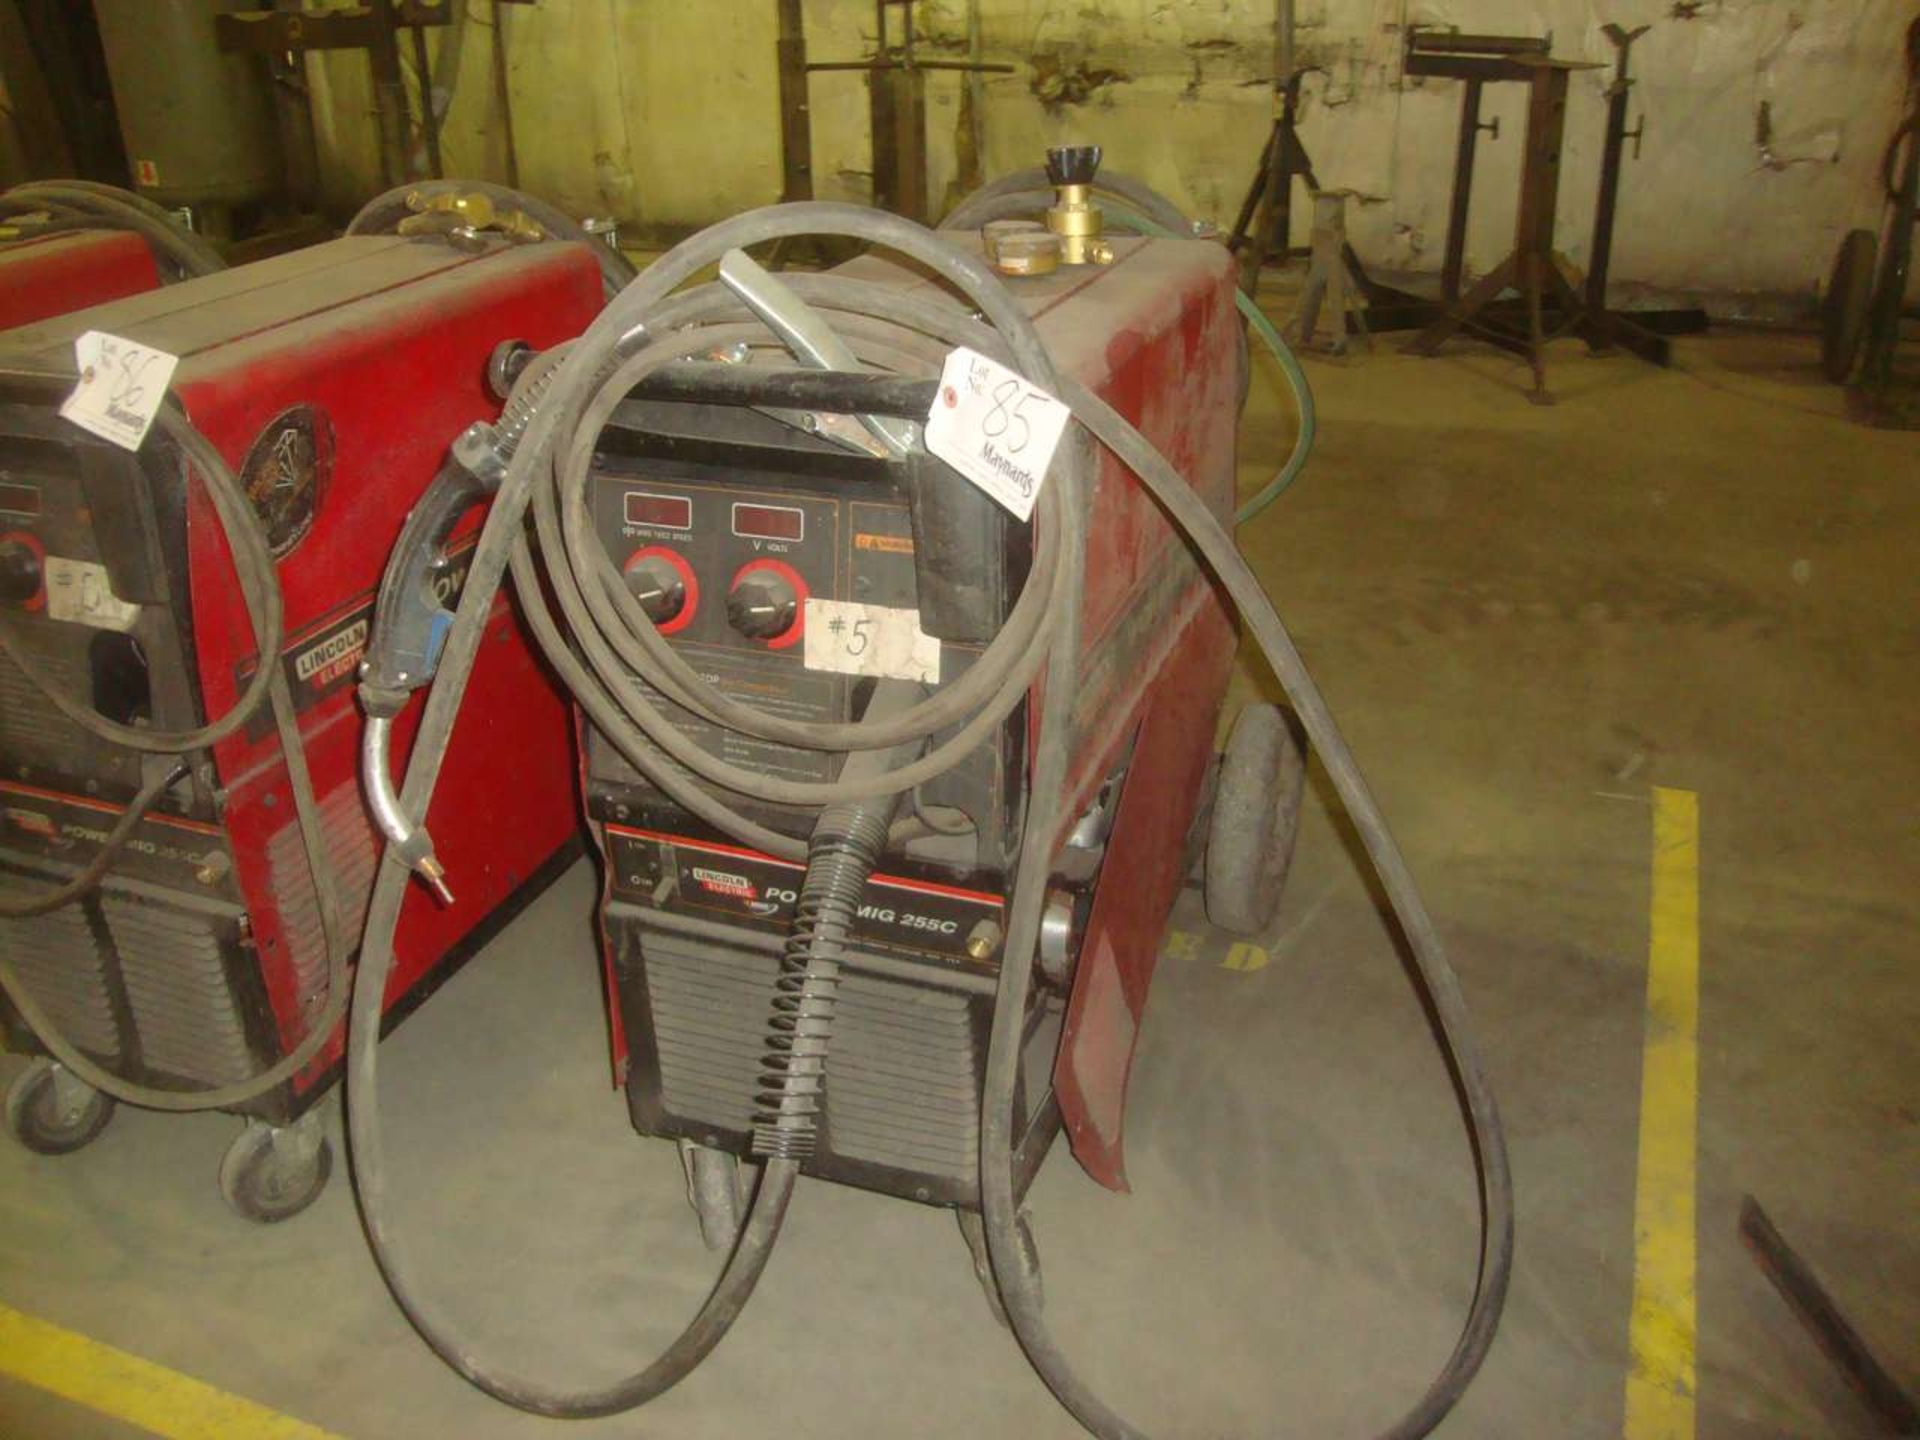 Lincoln Electric 255C Power Mig Welder